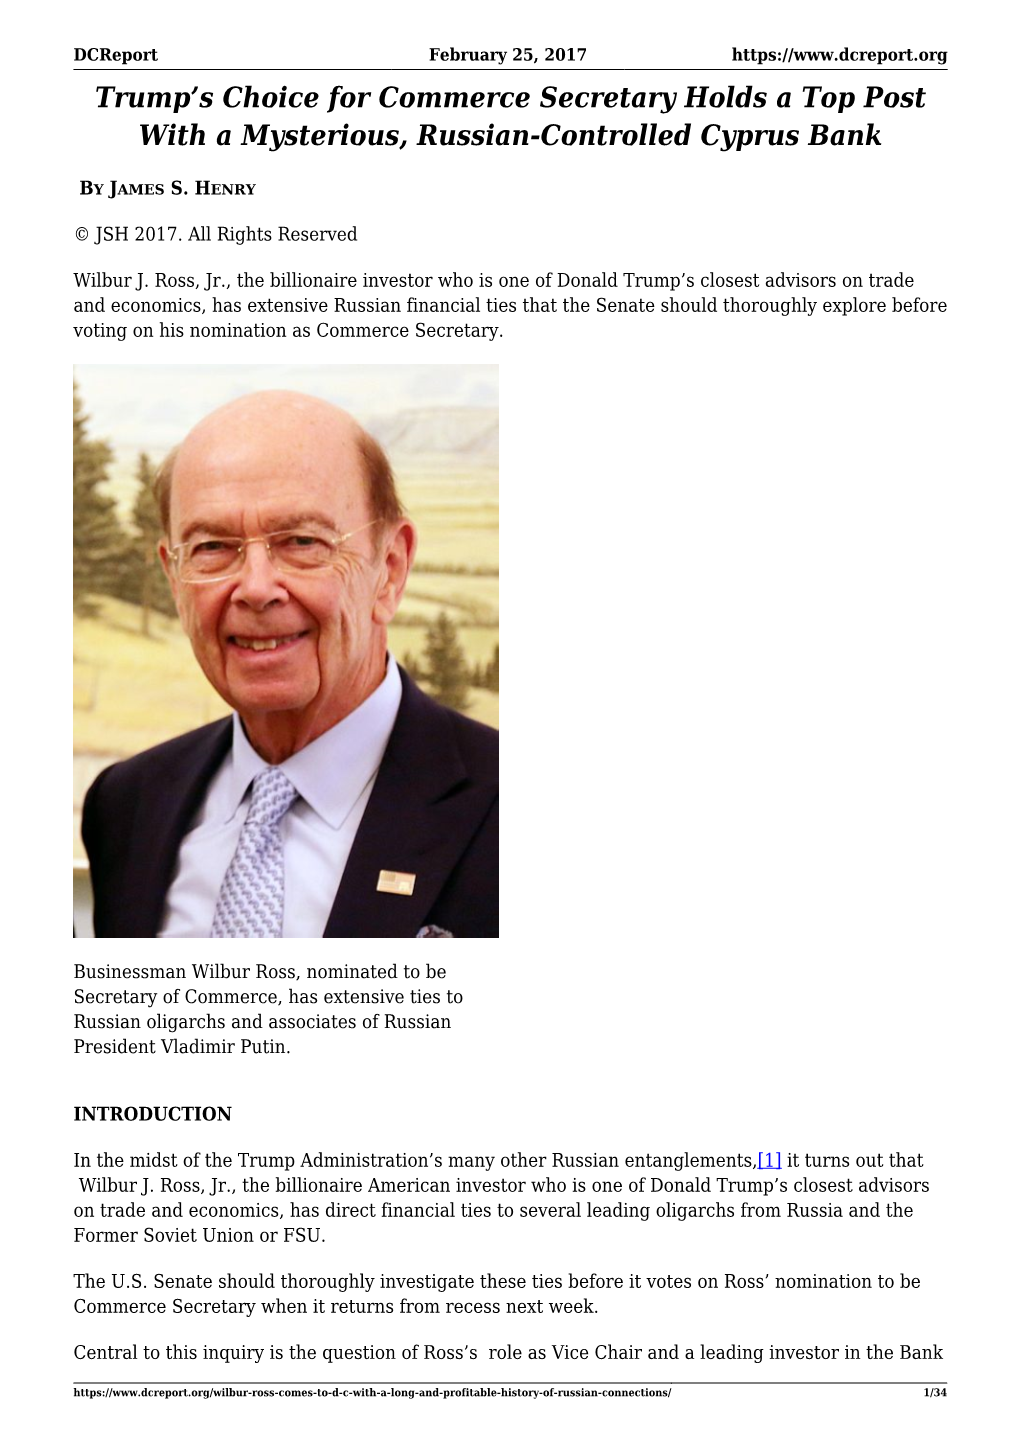 Wilbur Ross, Nominated to Be Secretary of Commerce, Has Extensive Ties to Russian Oligarchs and Associates of Russian President Vladimir Putin